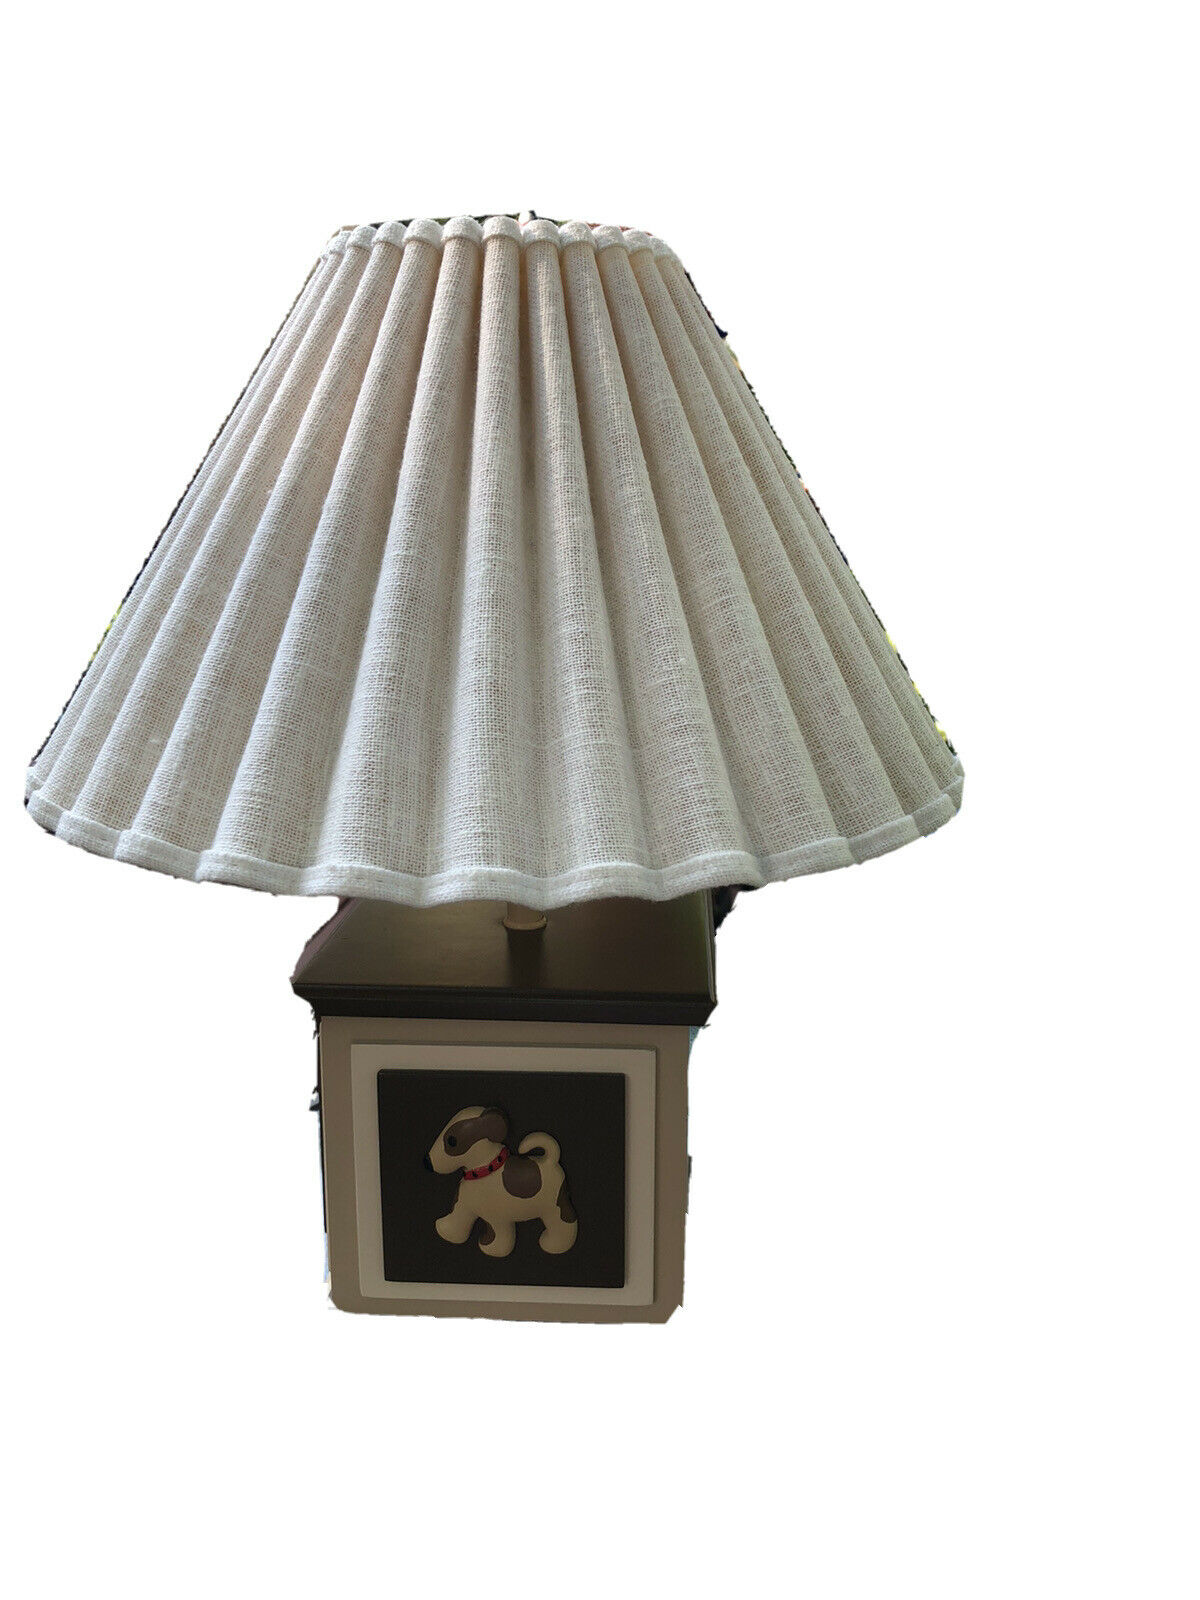 Children's Puppy Dog Tabletop Lamp W/ Shade * Brand New! * Great For A Nursery!